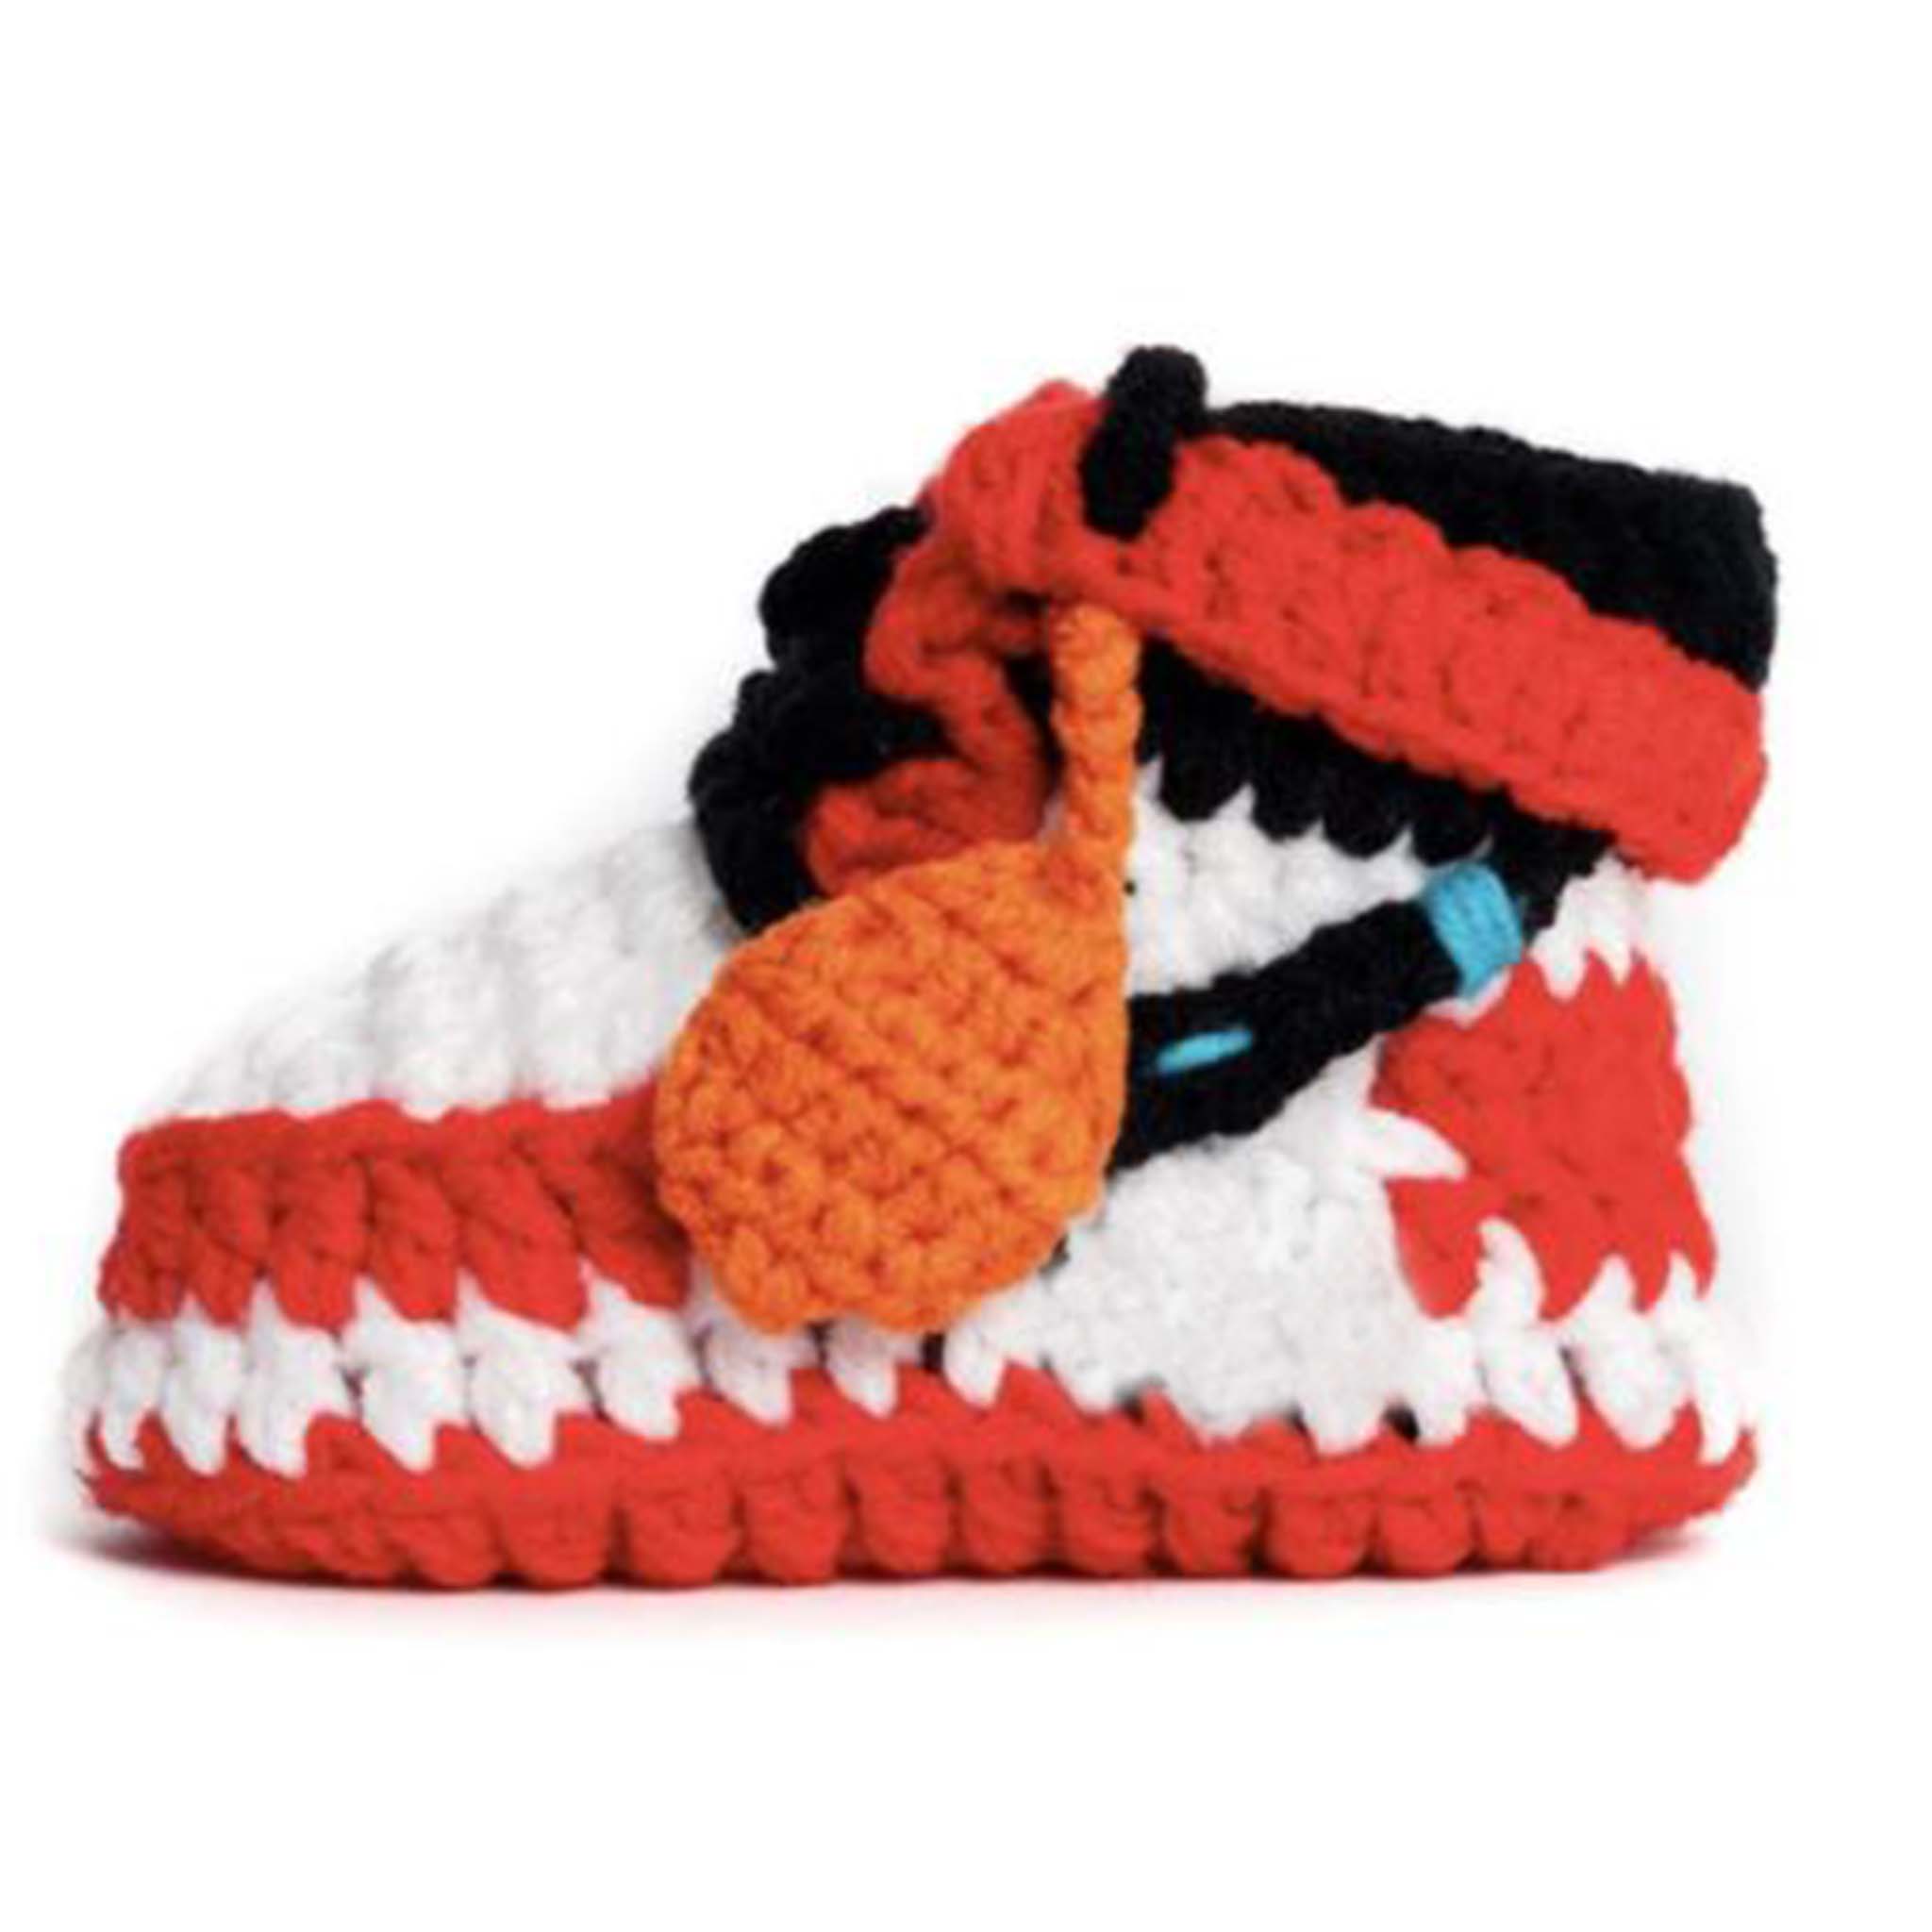 Off white red crochet booties